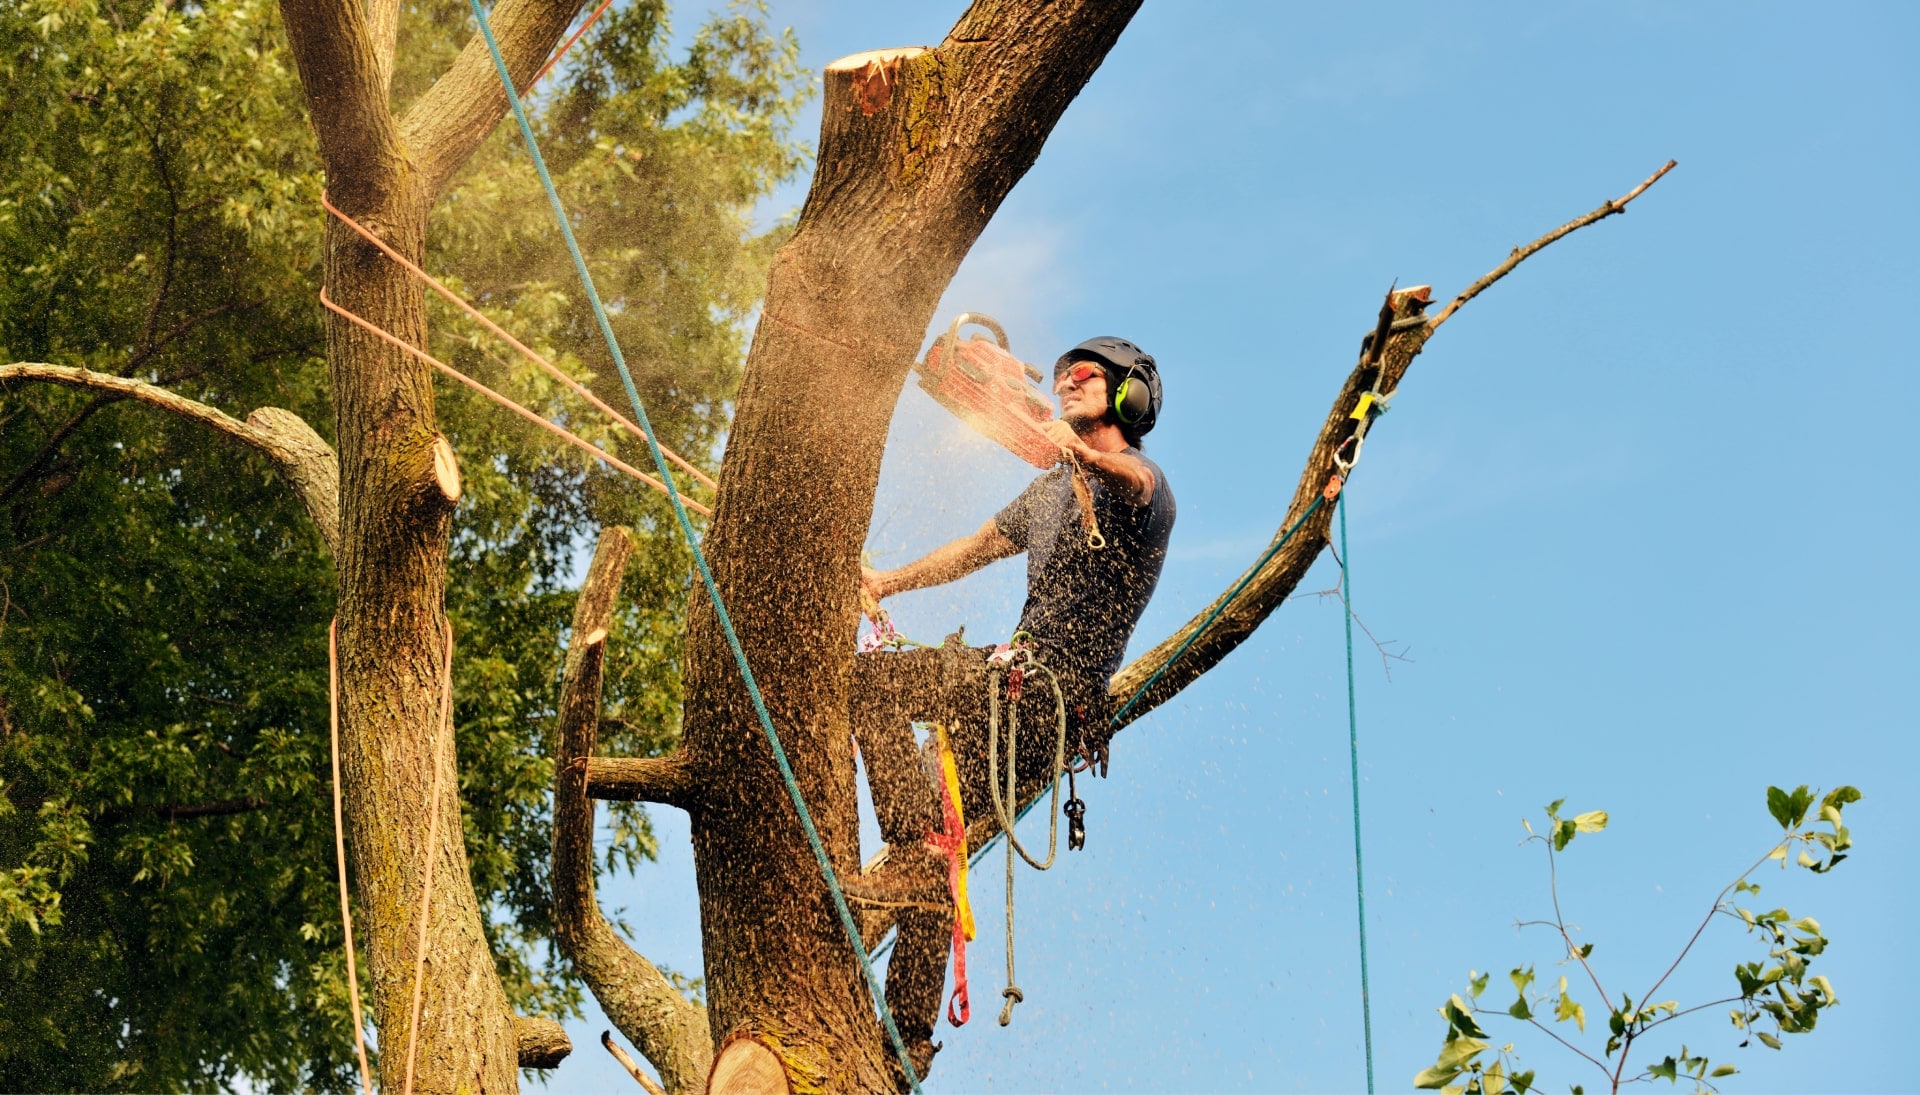 Murray tree removal experts solve tree issues.